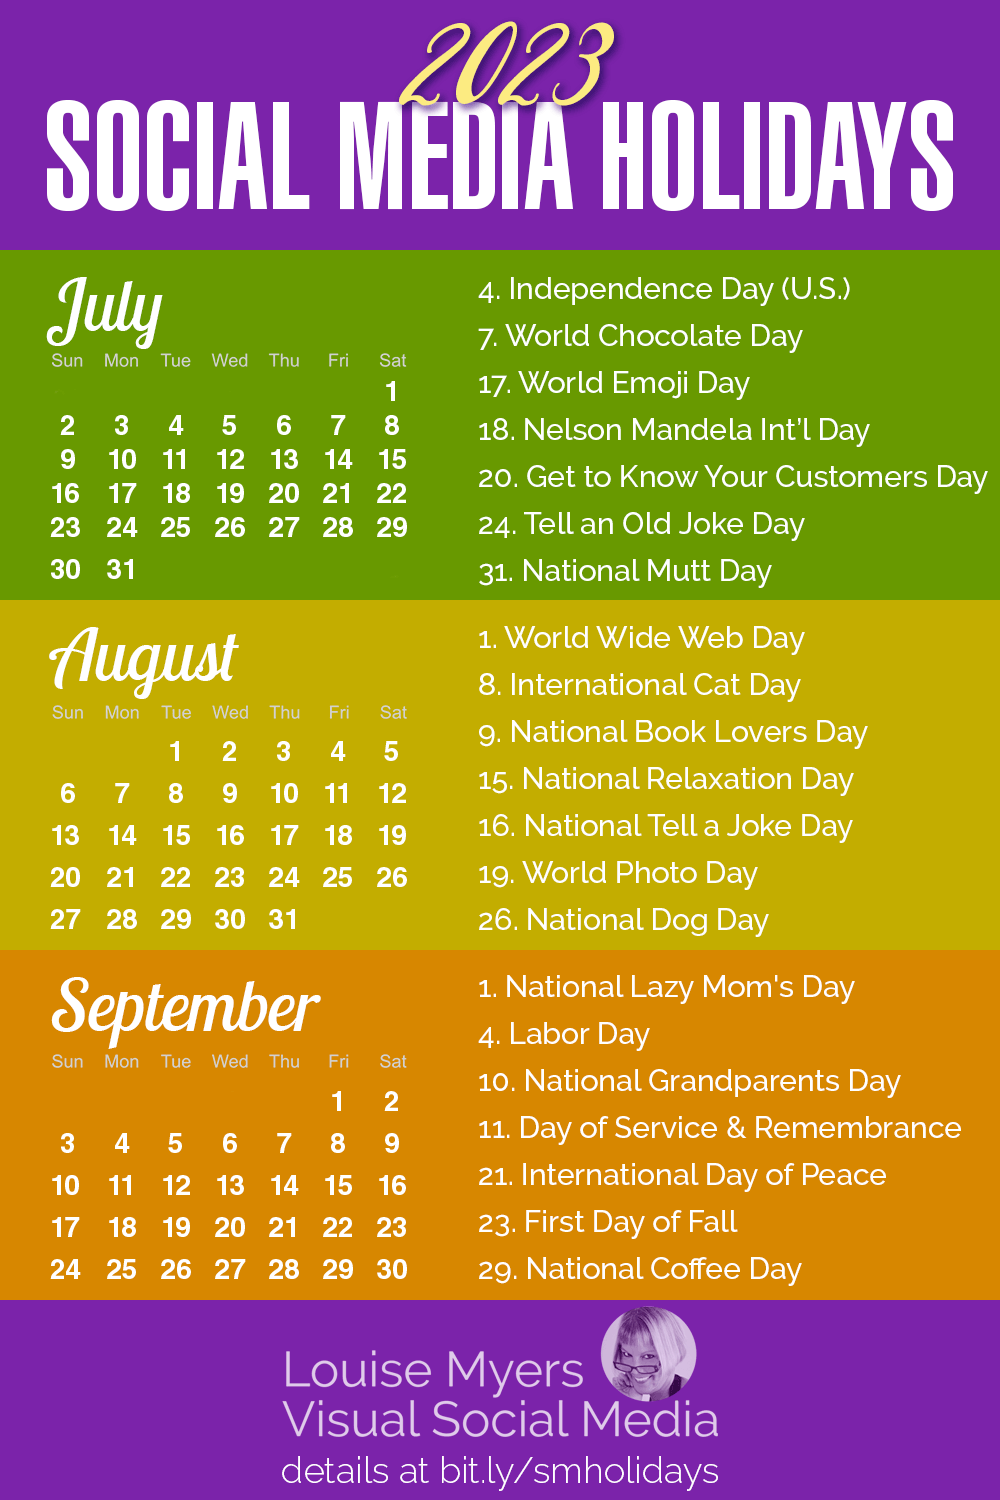 july, august and september 2023 calendars with list of social media holidays for these summer months.